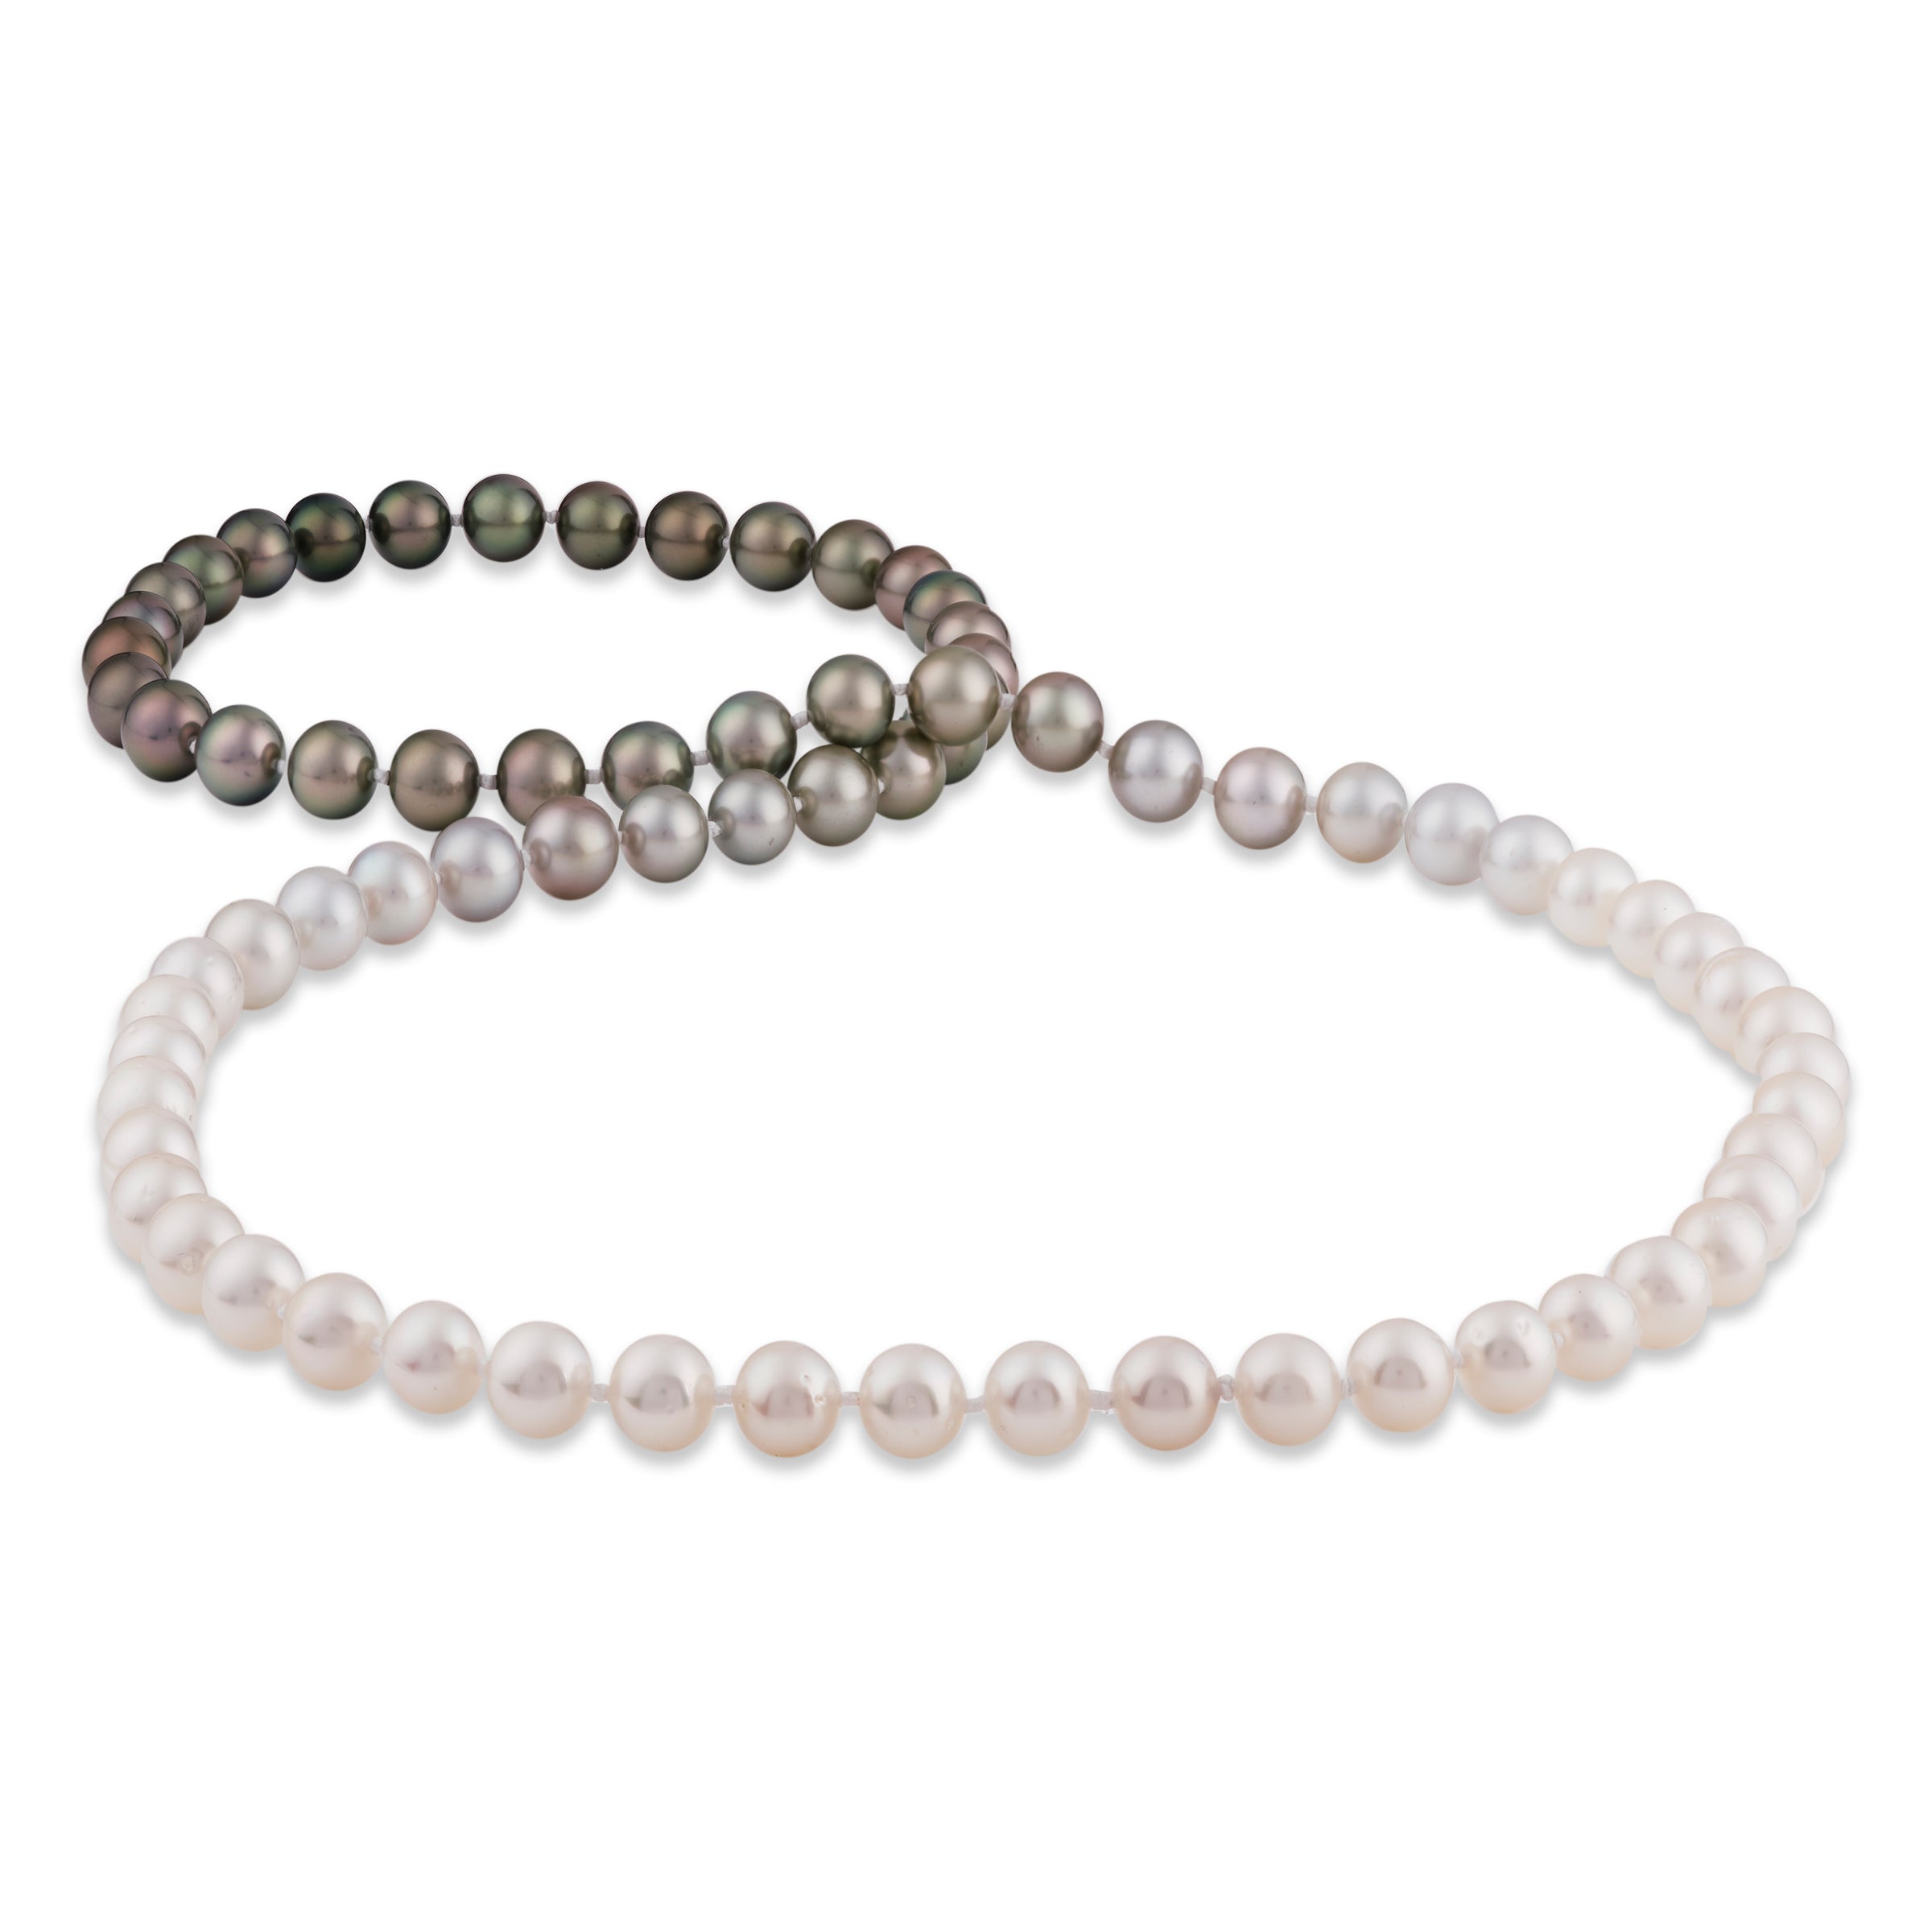 33 Ombre South Sea White Pearl and Tahitian Black Pearl Strand- Made in Hawaii